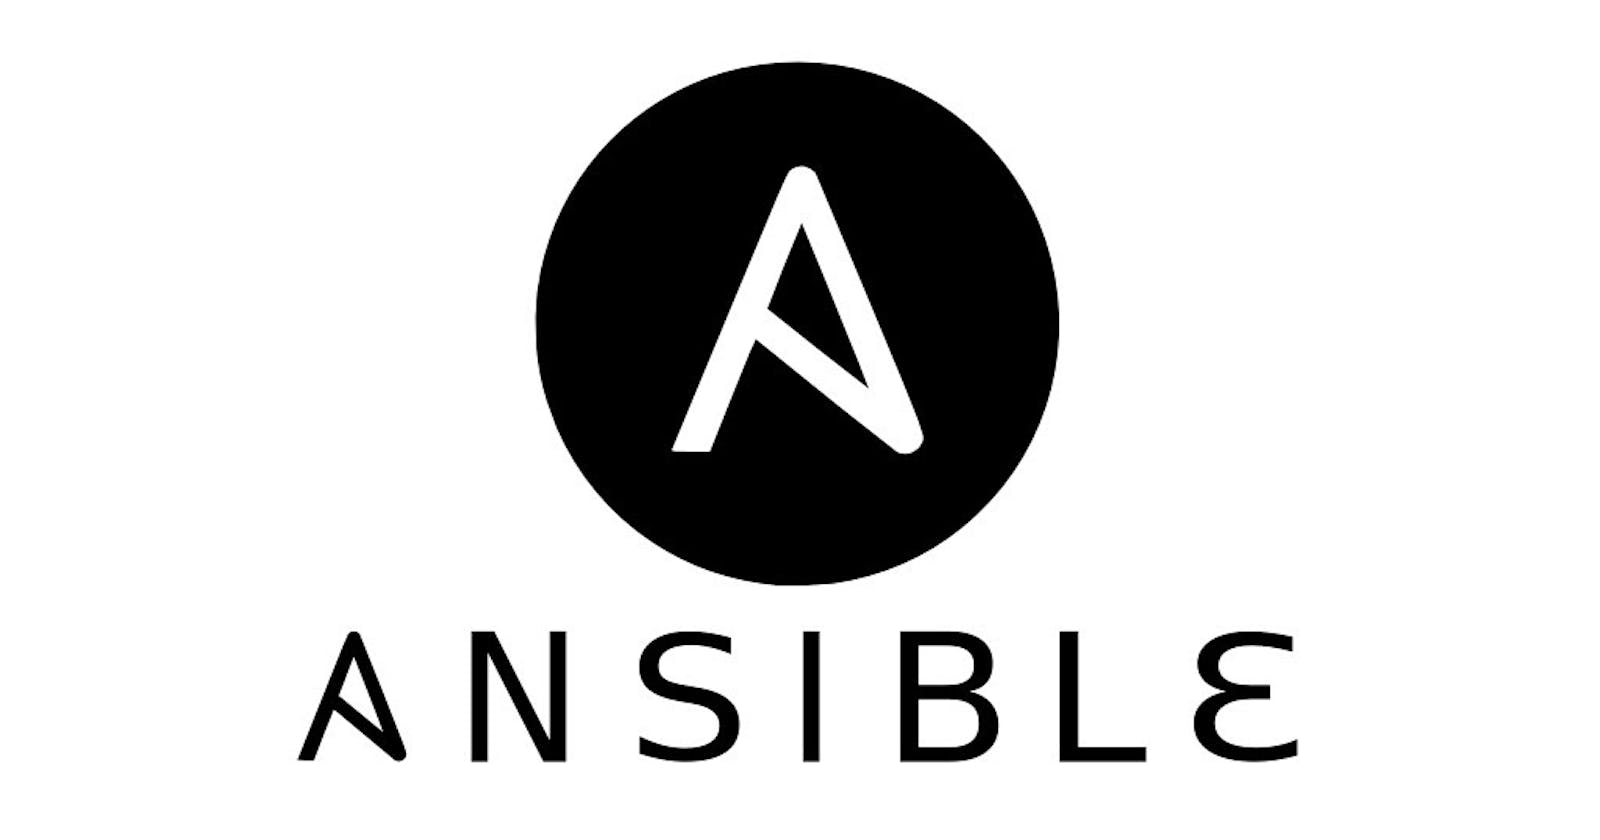 Why use Ansible?